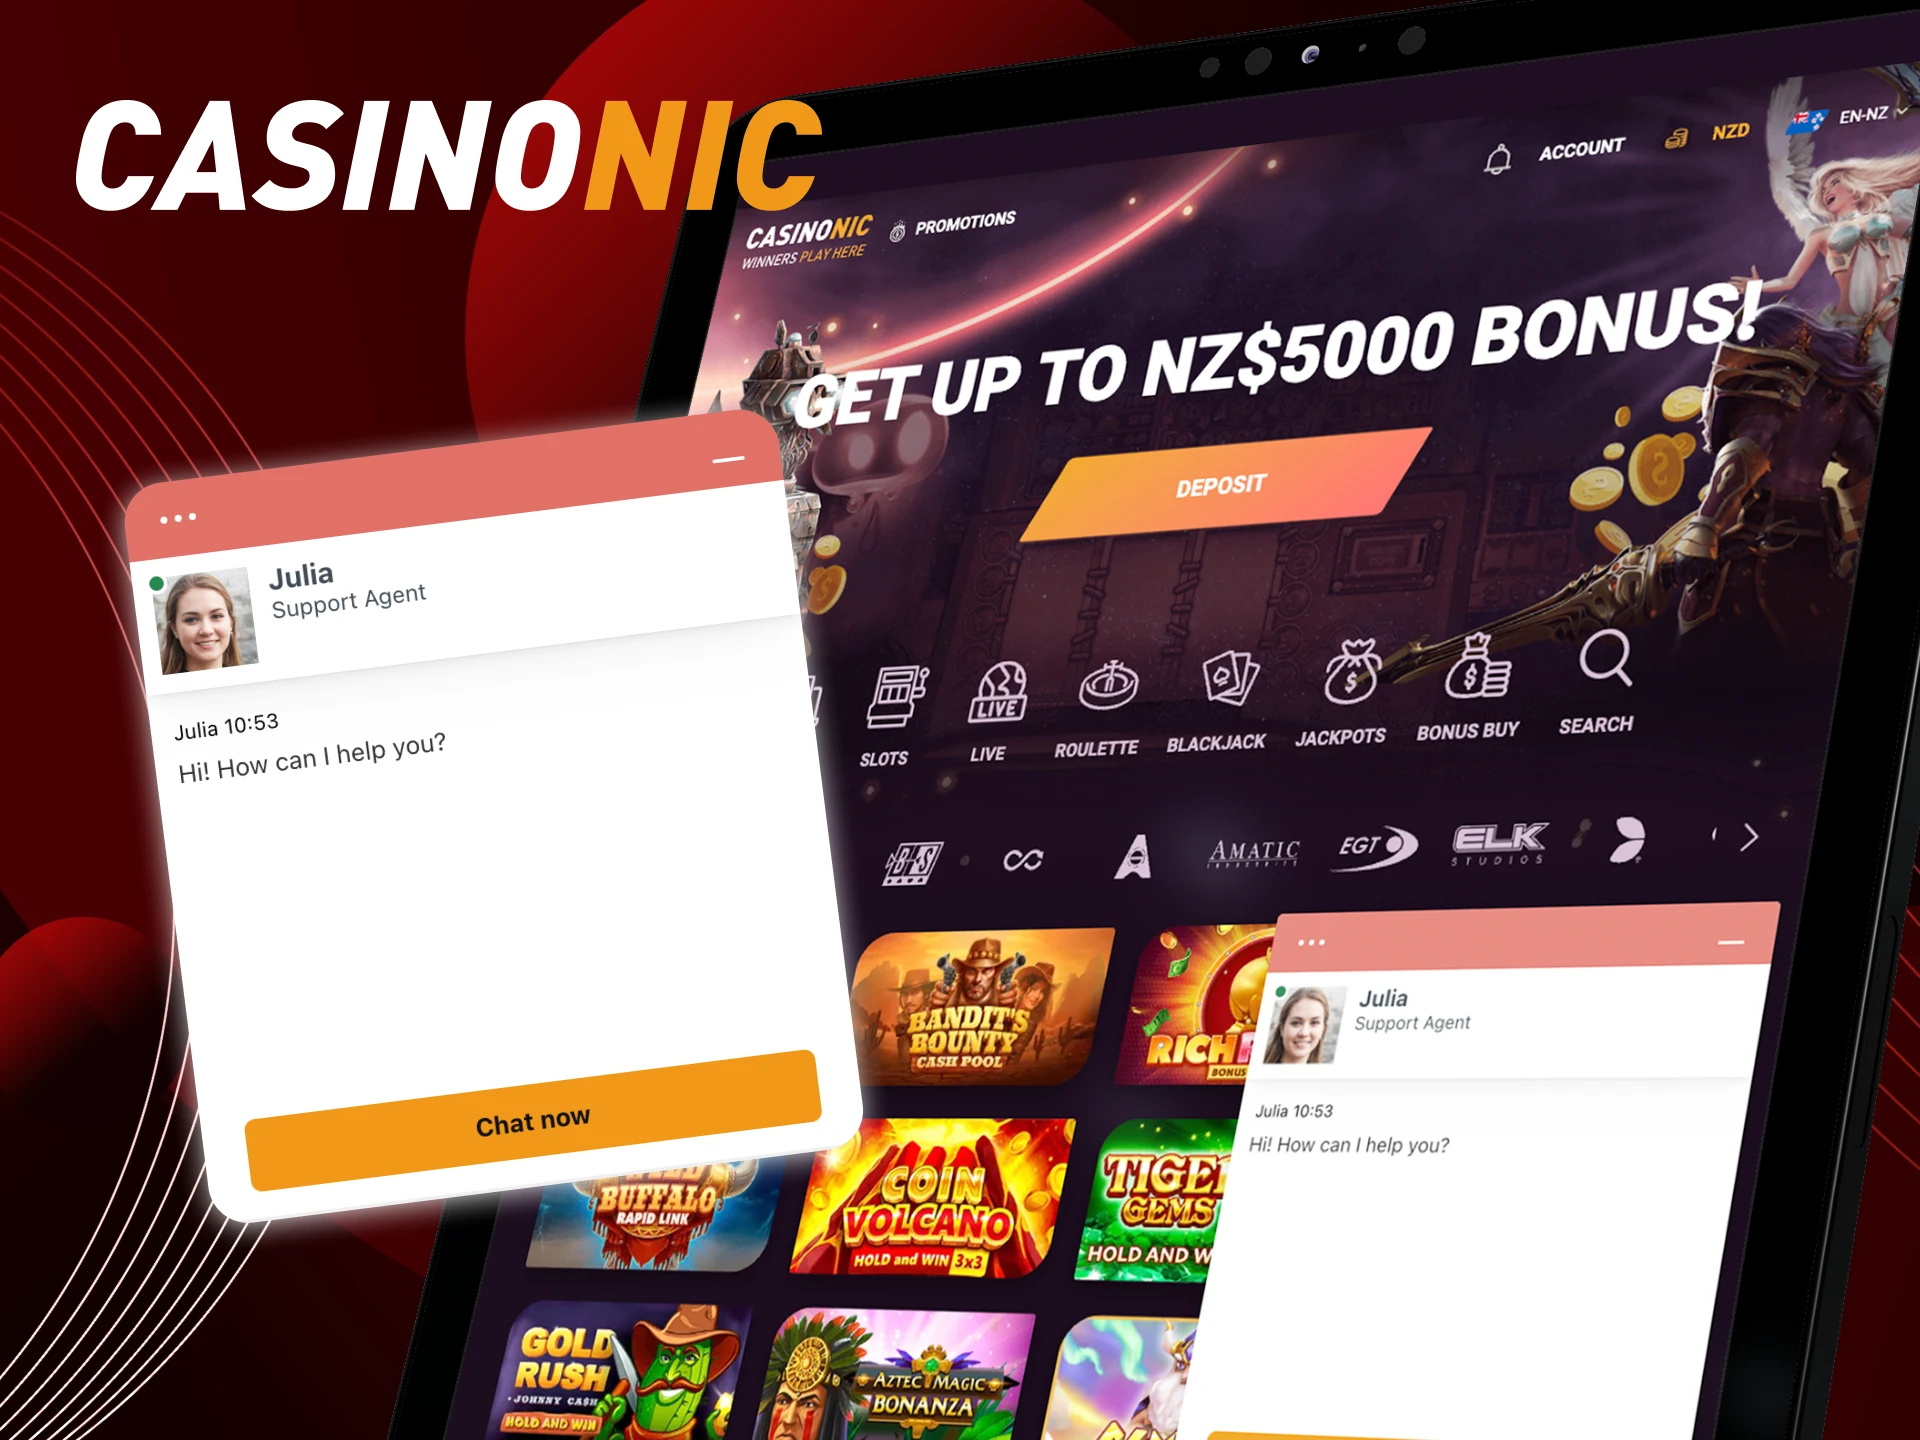 What is live chat on the online casino website CasinoNic.